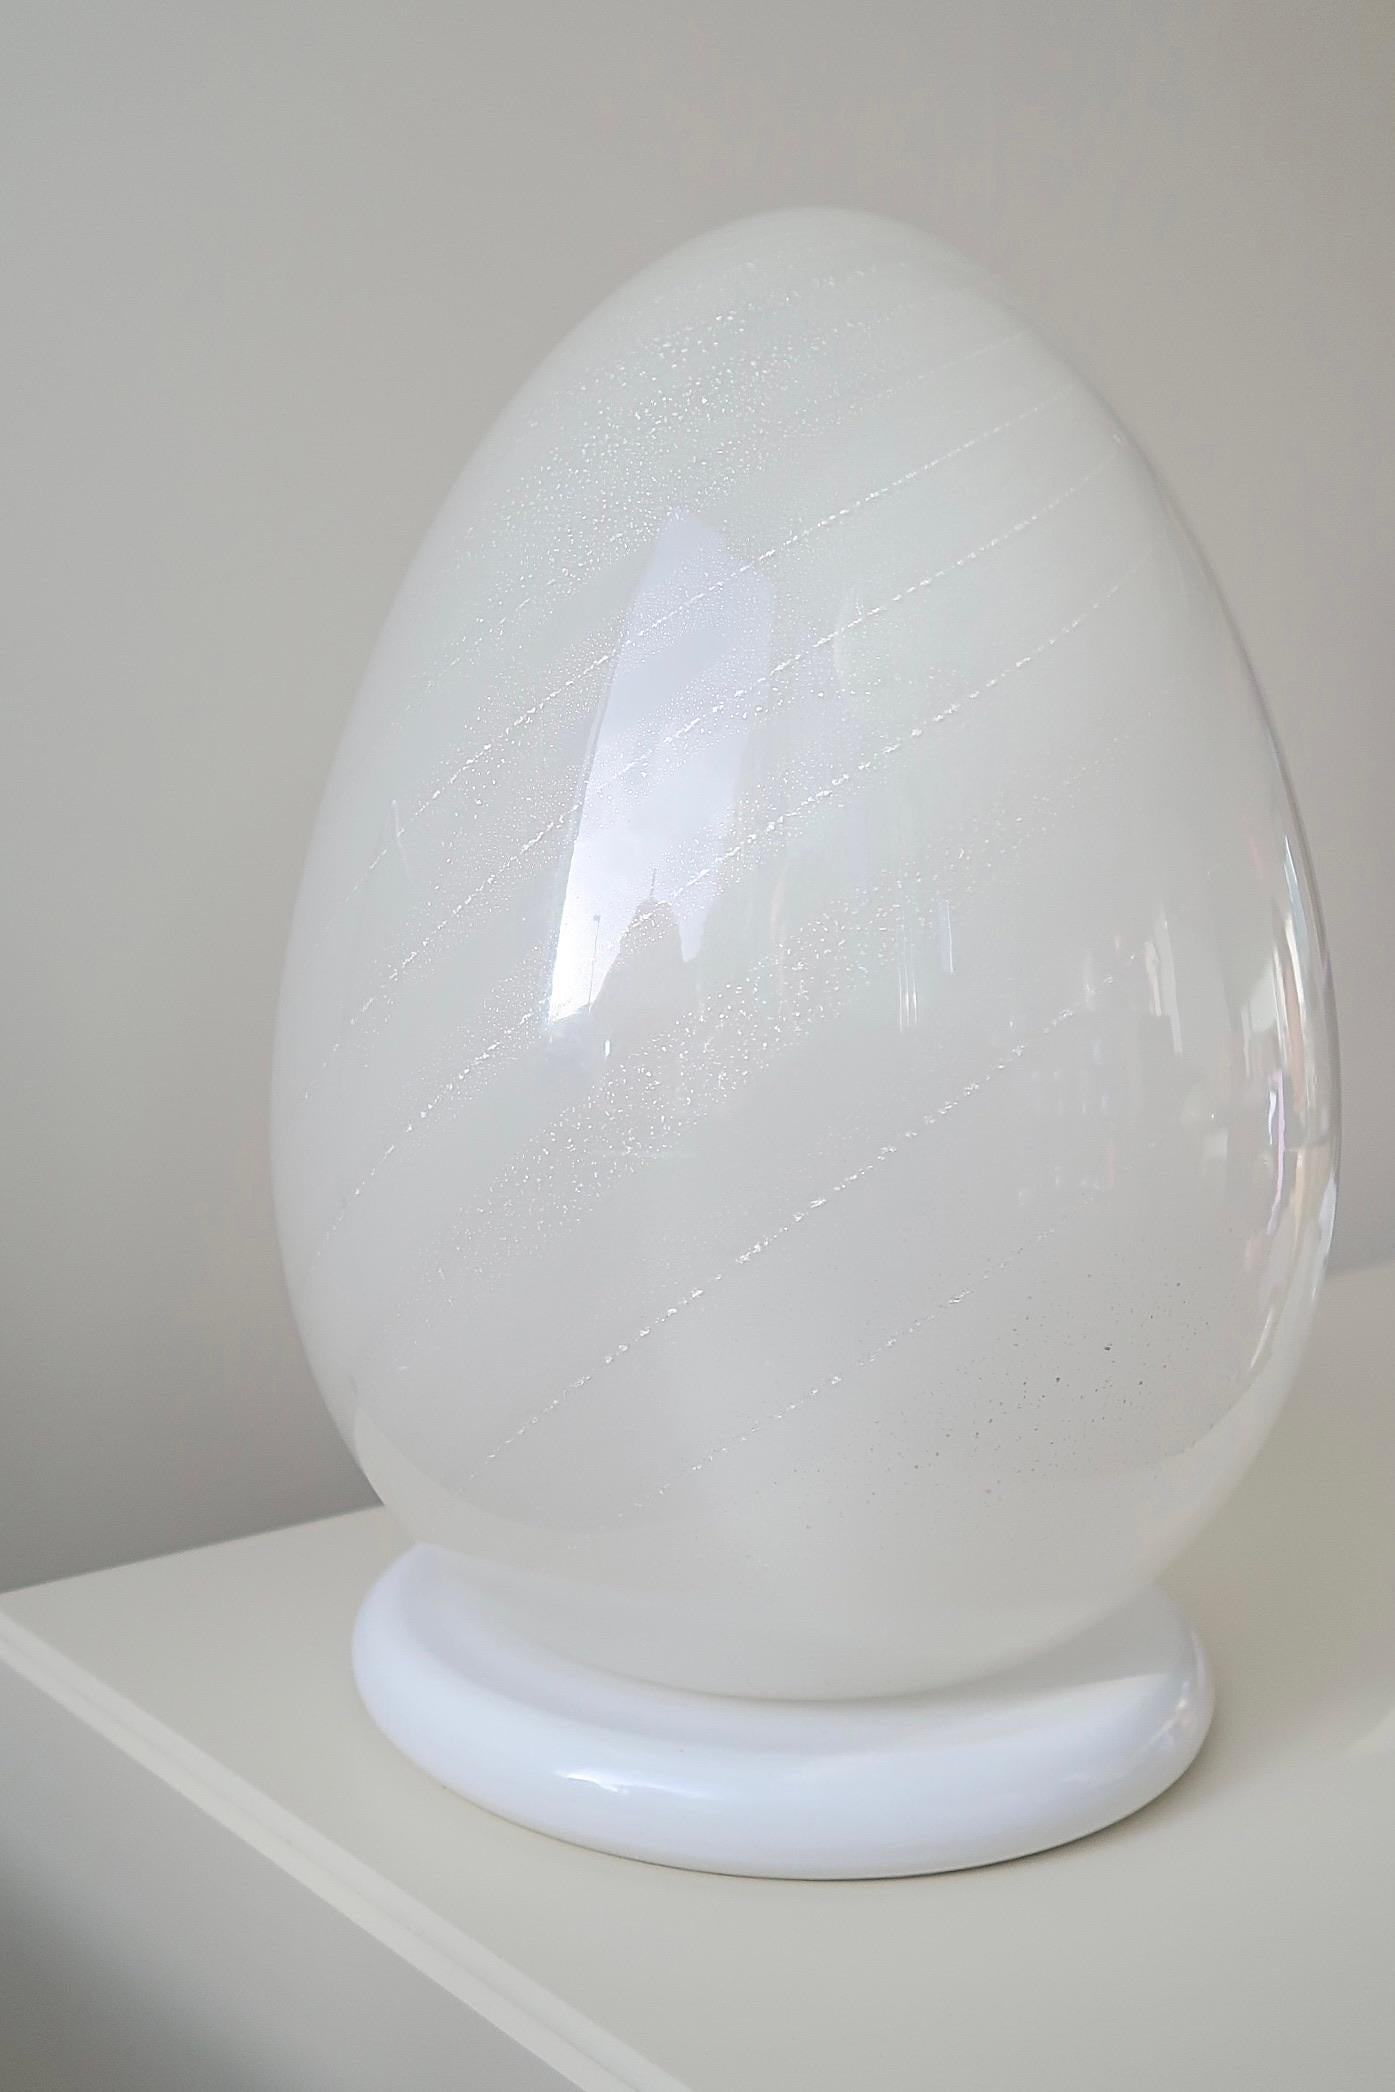 Large vintage Murano glass table lamp with silver swirl. Mouth blown into a beautiful oval shape like an egg and is therefore known as ''egg lamp''. Handmade in Italy, 1970s, and comes with new white cord.

H:38cm D:26cm.